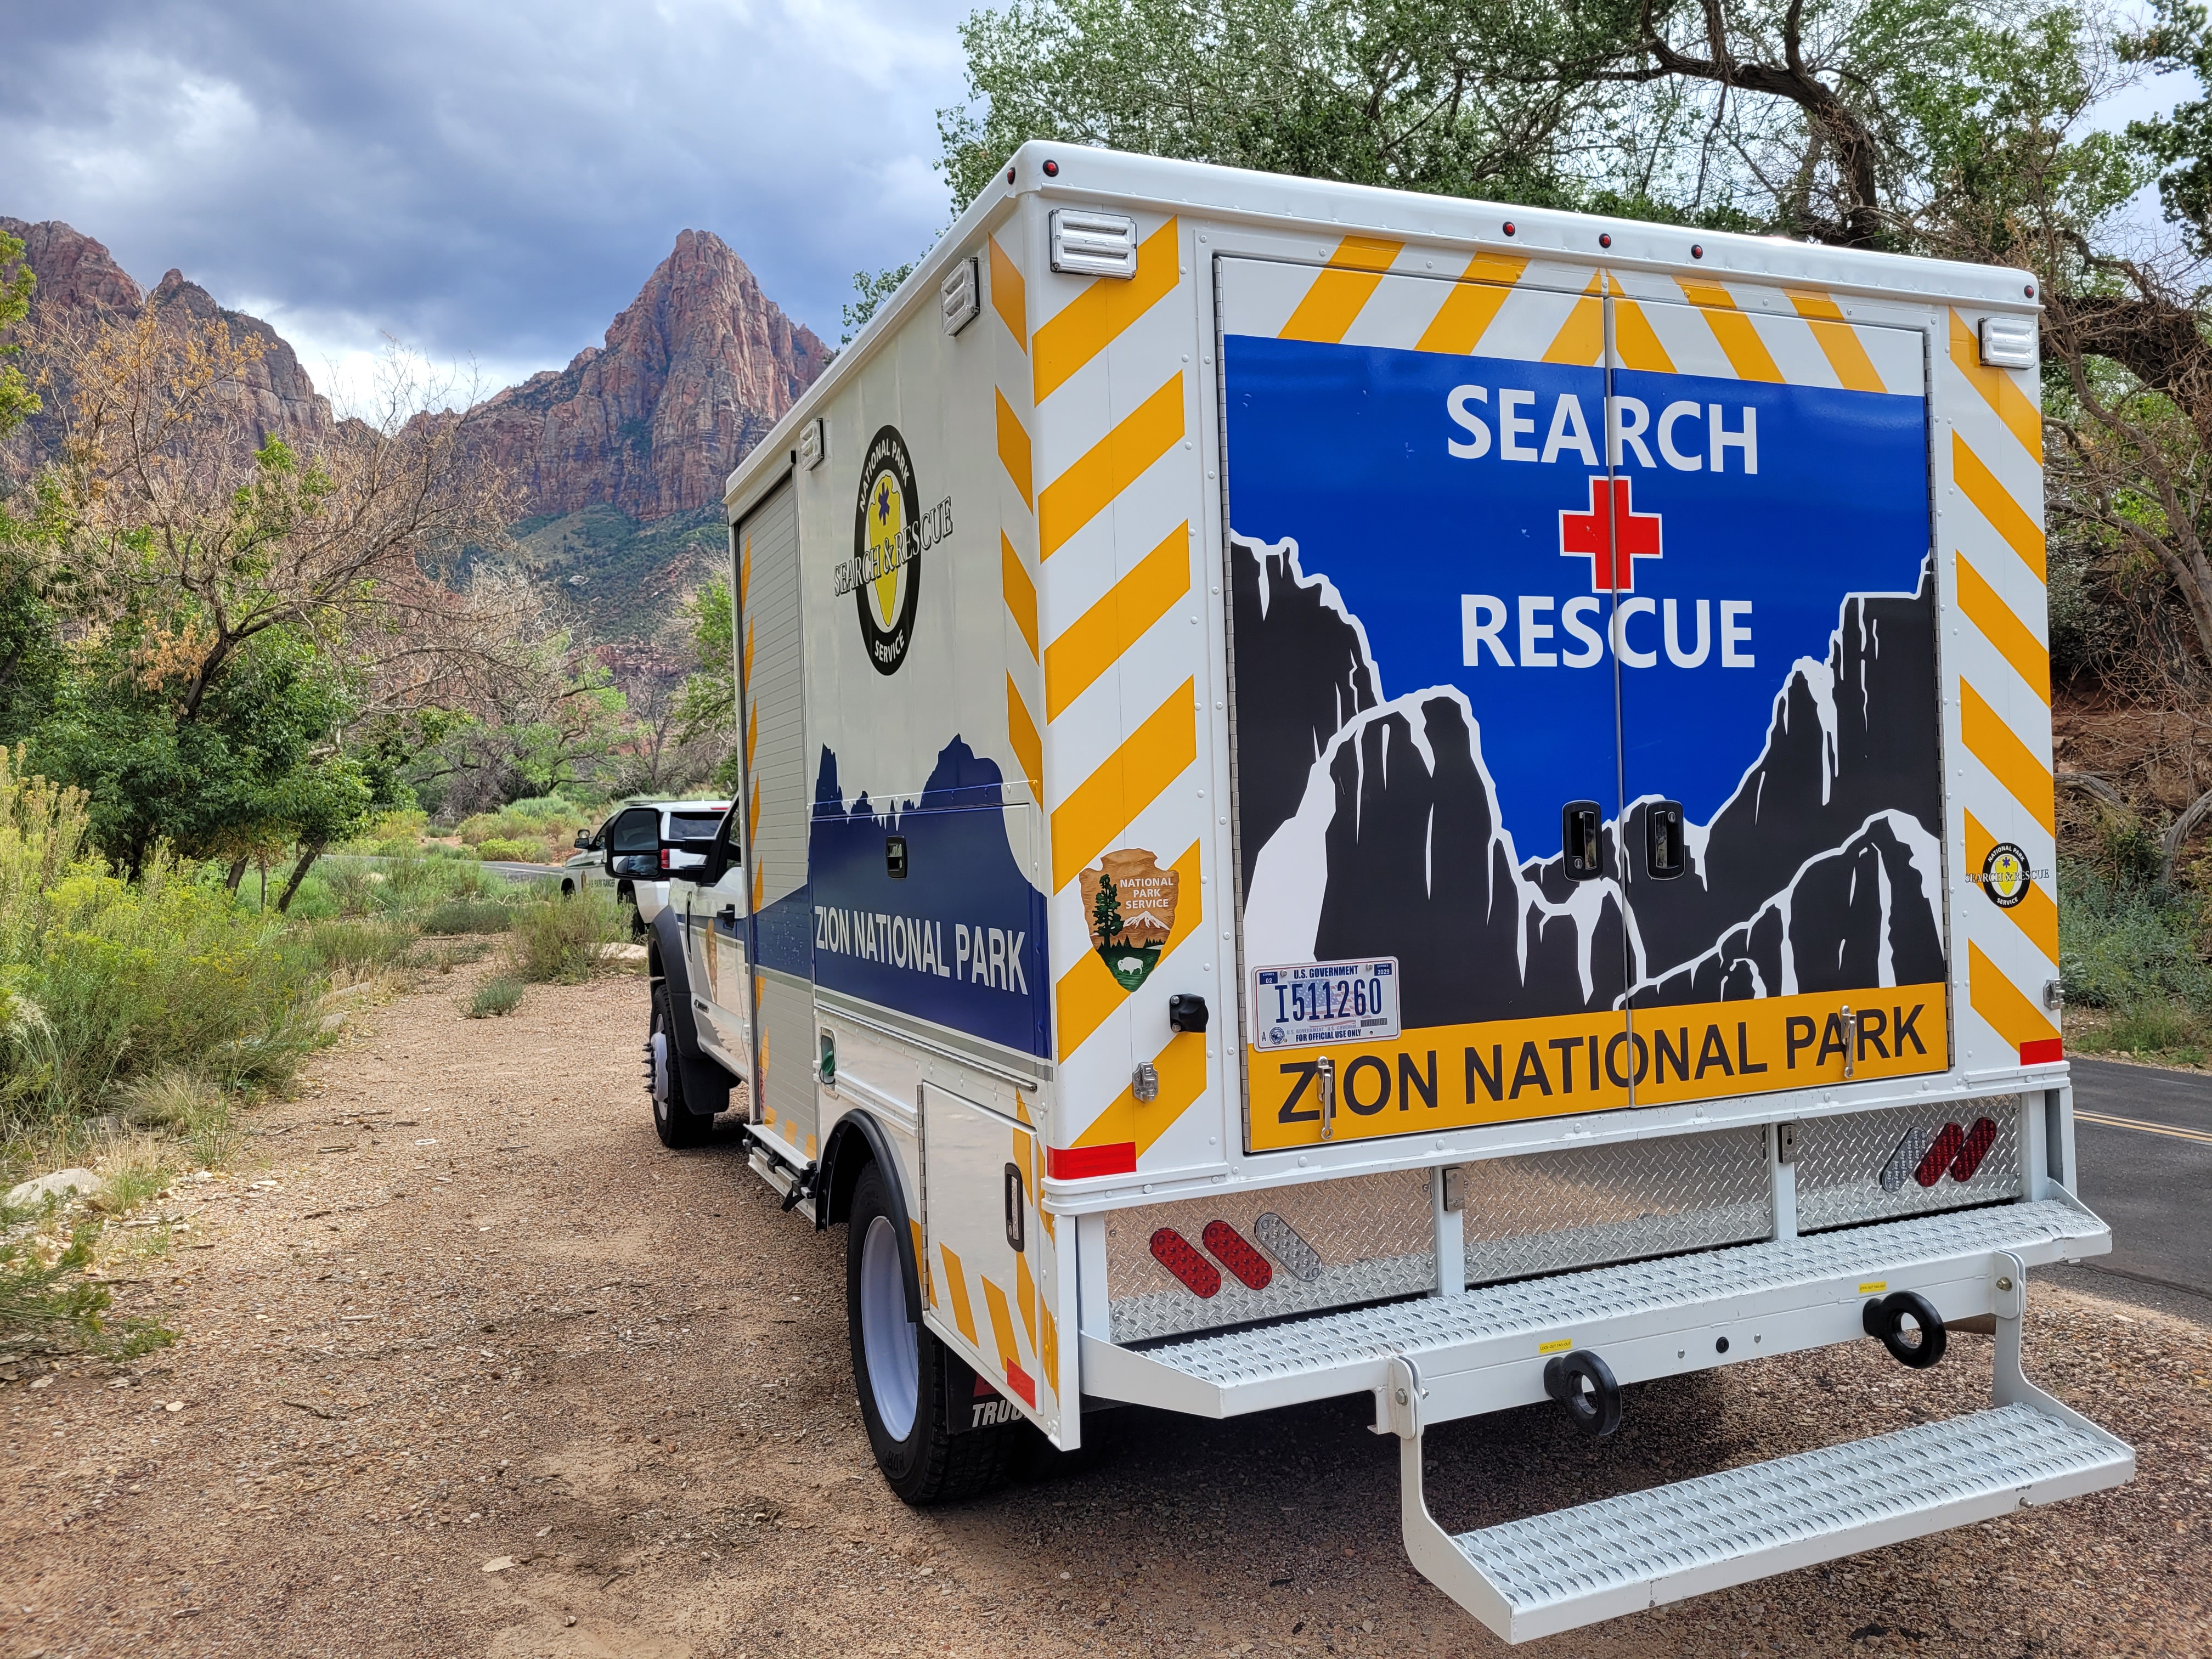 A truck with red rock in the background. The truck is labeled Zion Search and Rescue.